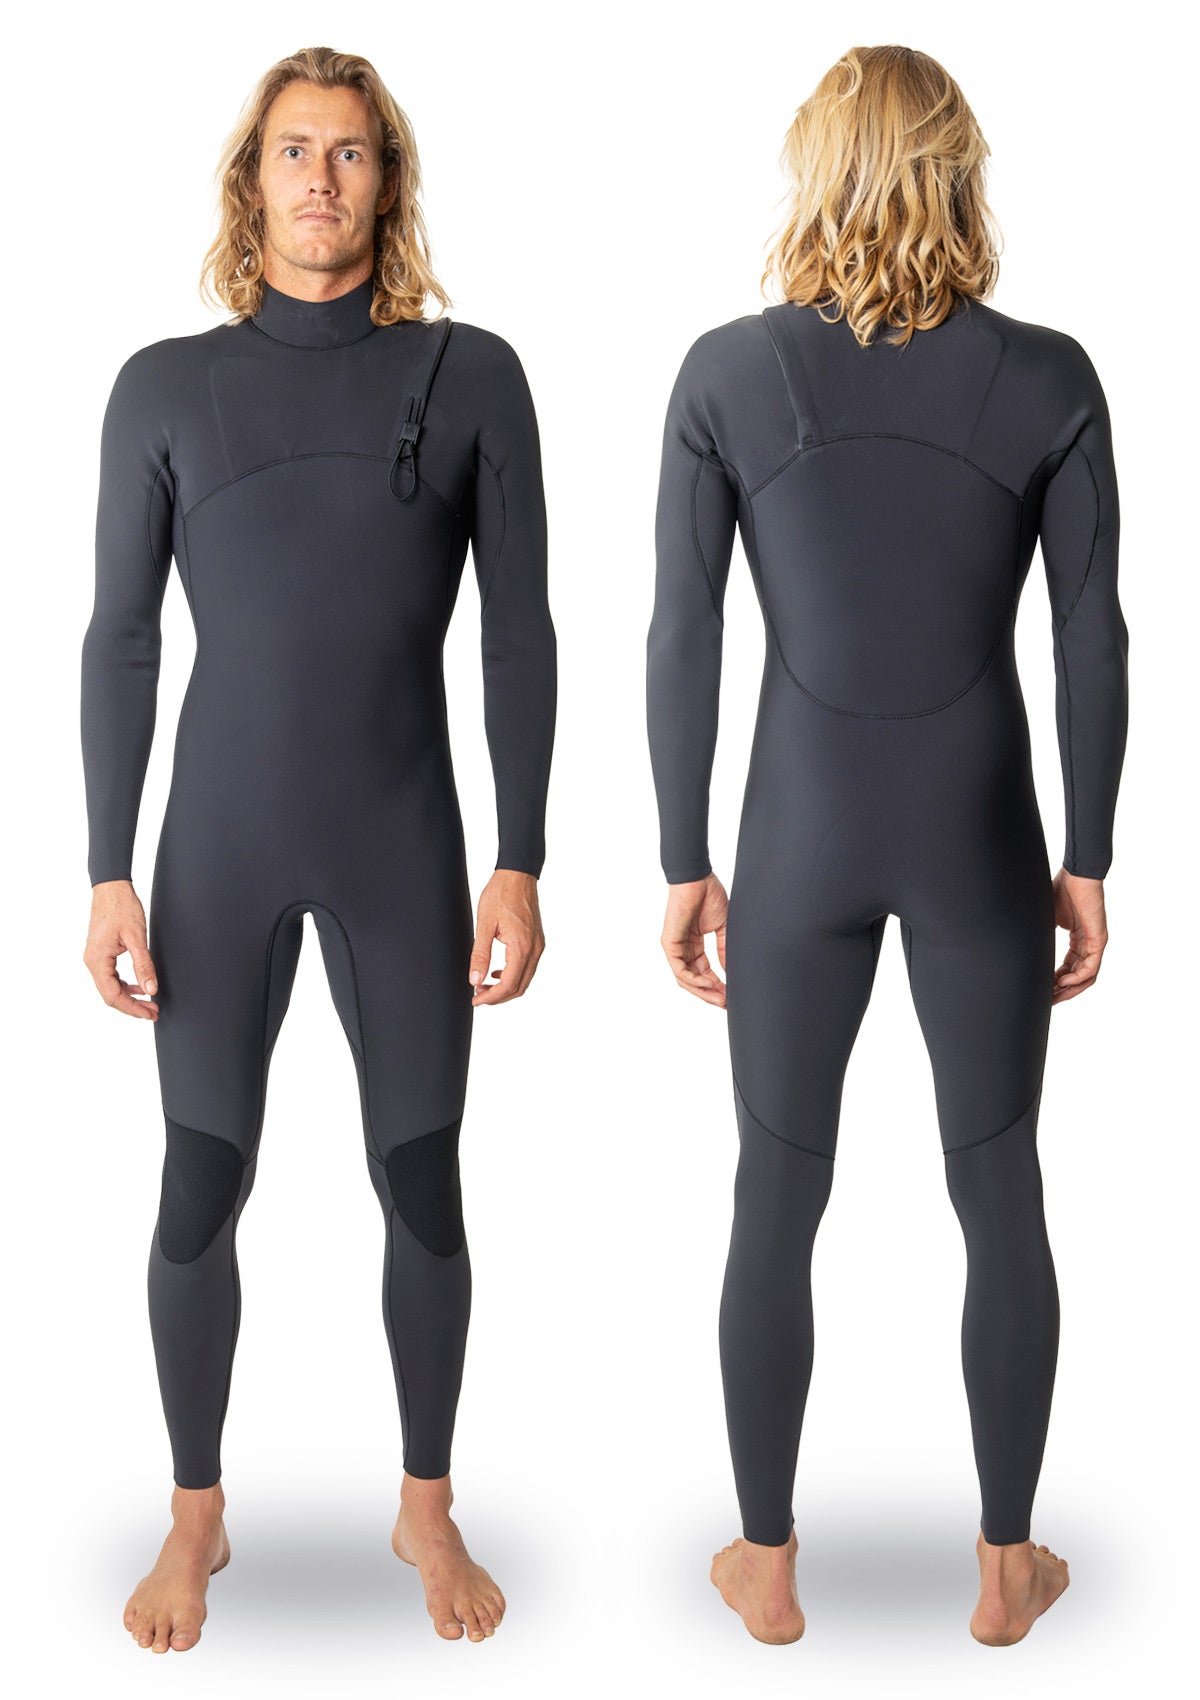 Best neoprene wetsuits  Guide - Nootica - Water addicts, like you!